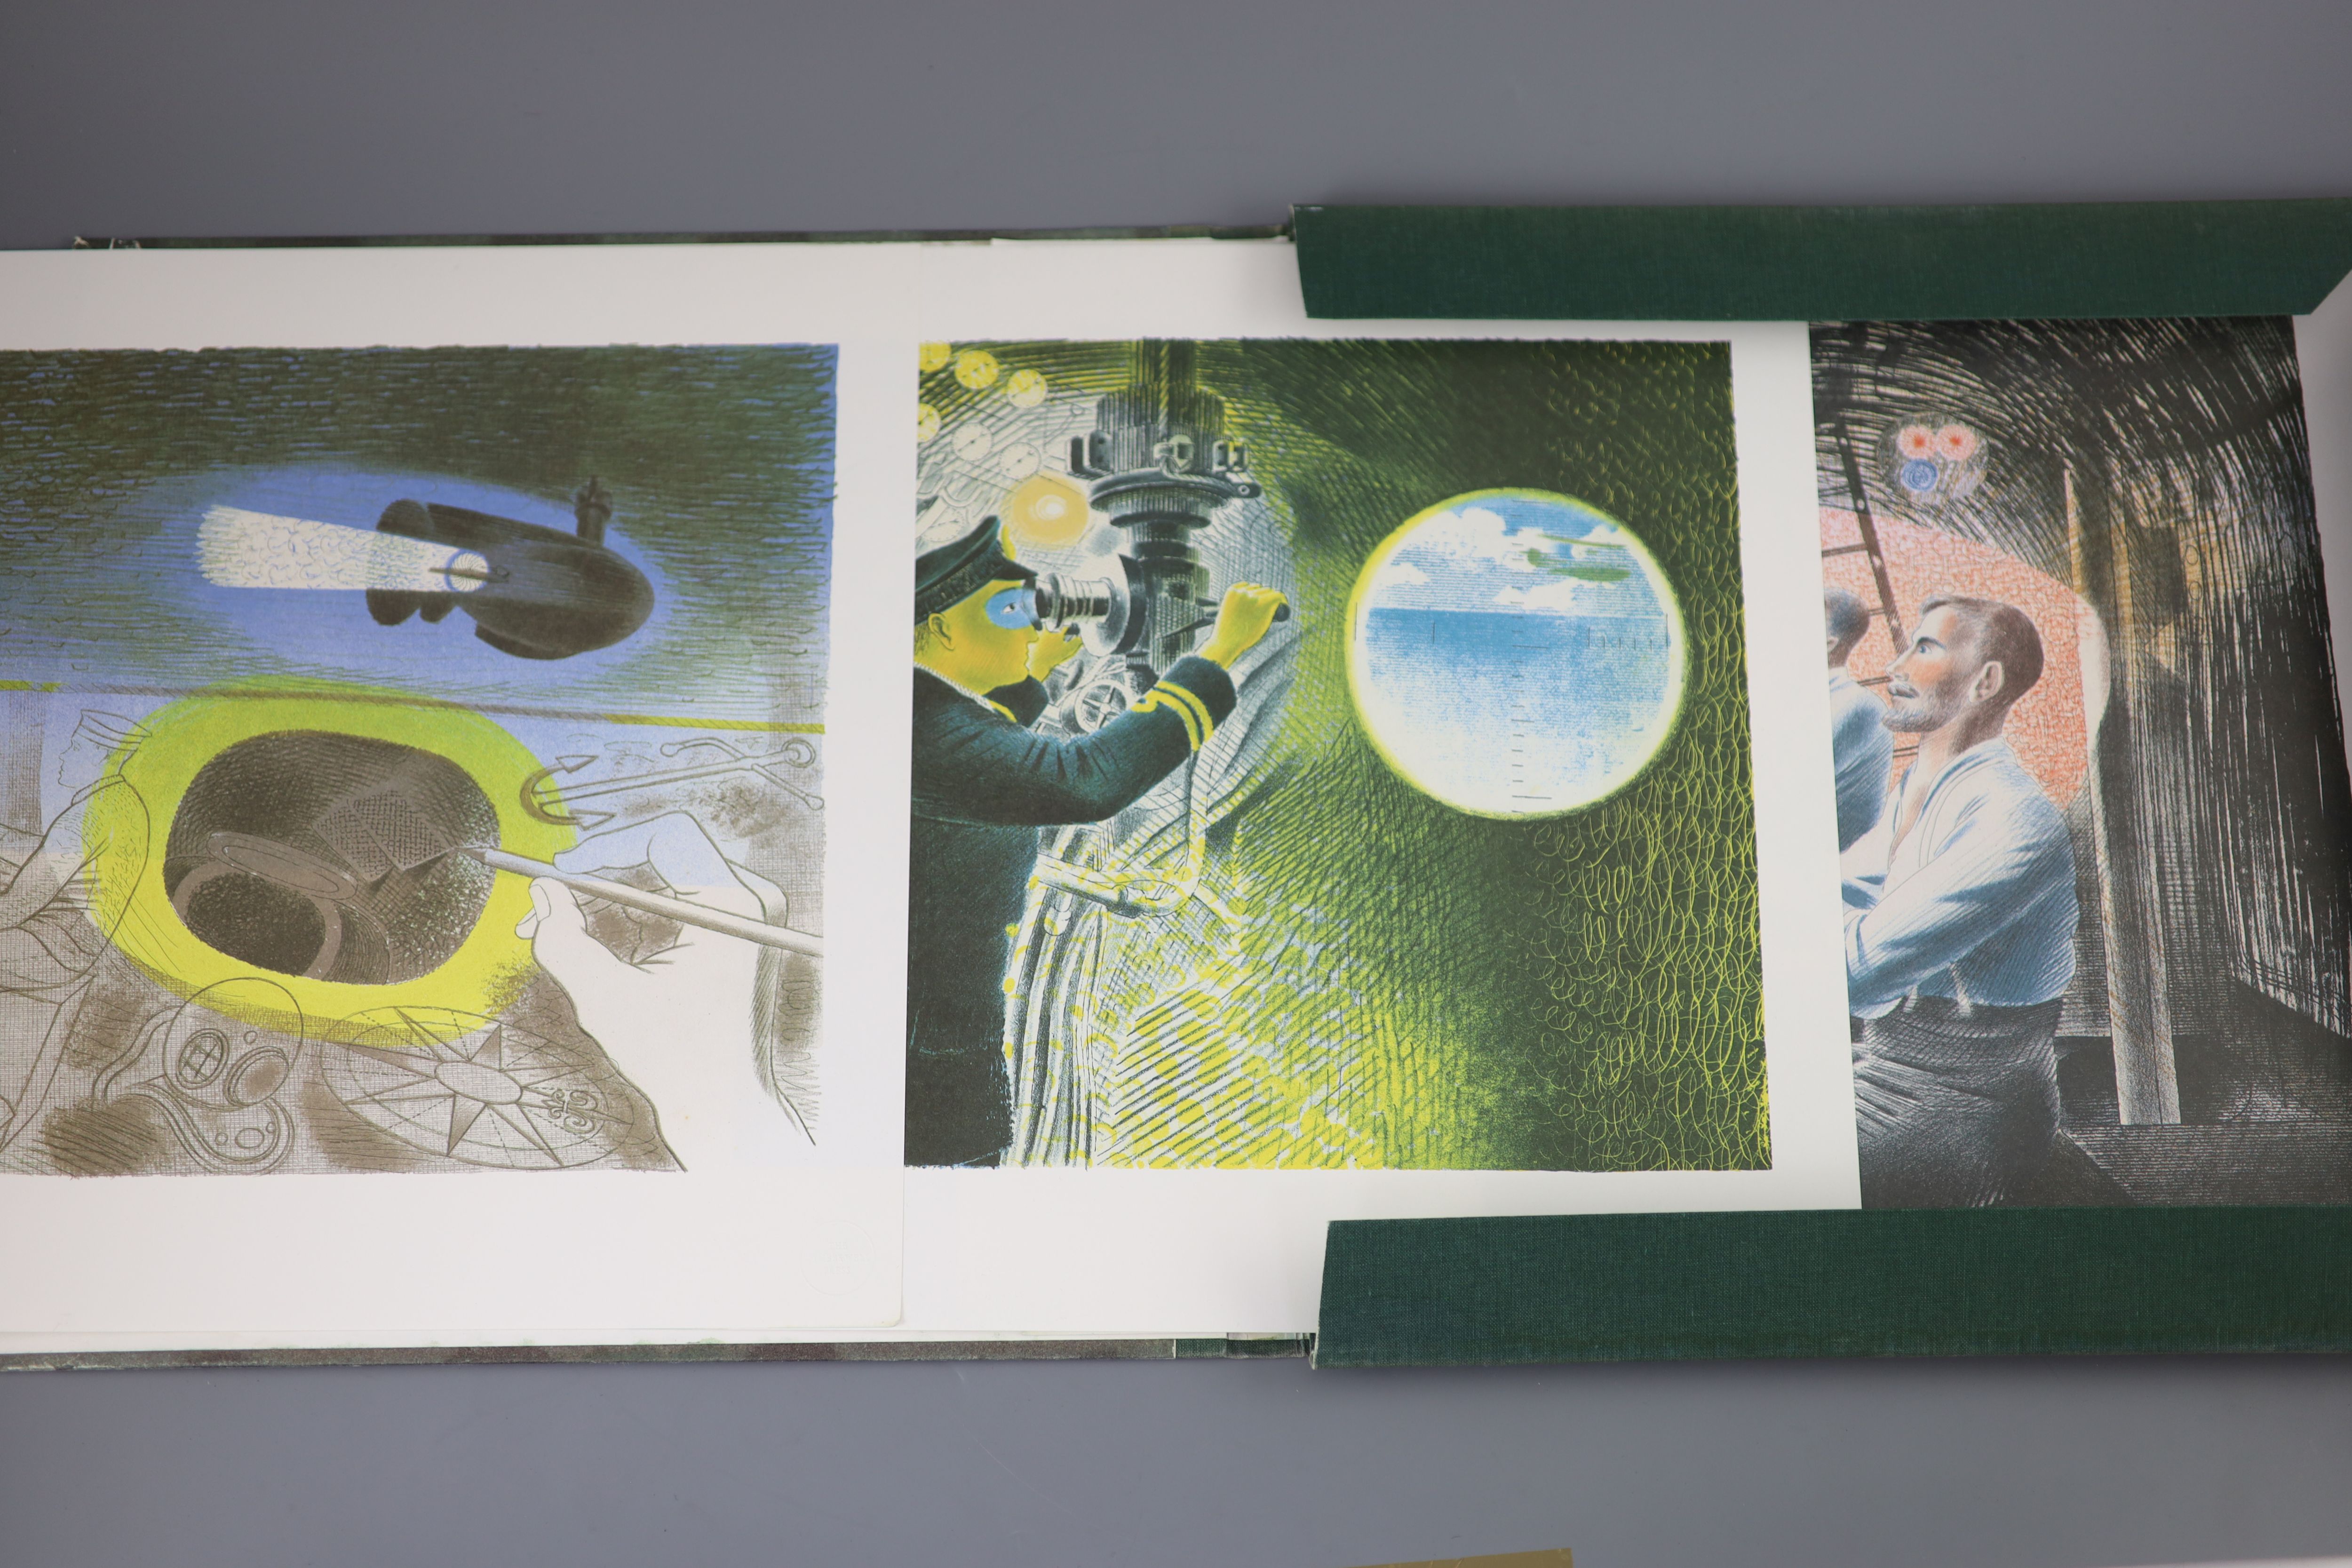 Eric Ravilious (1903-1942), Submarine Dream, lithographs and letters, 14.5 x 14.75in.